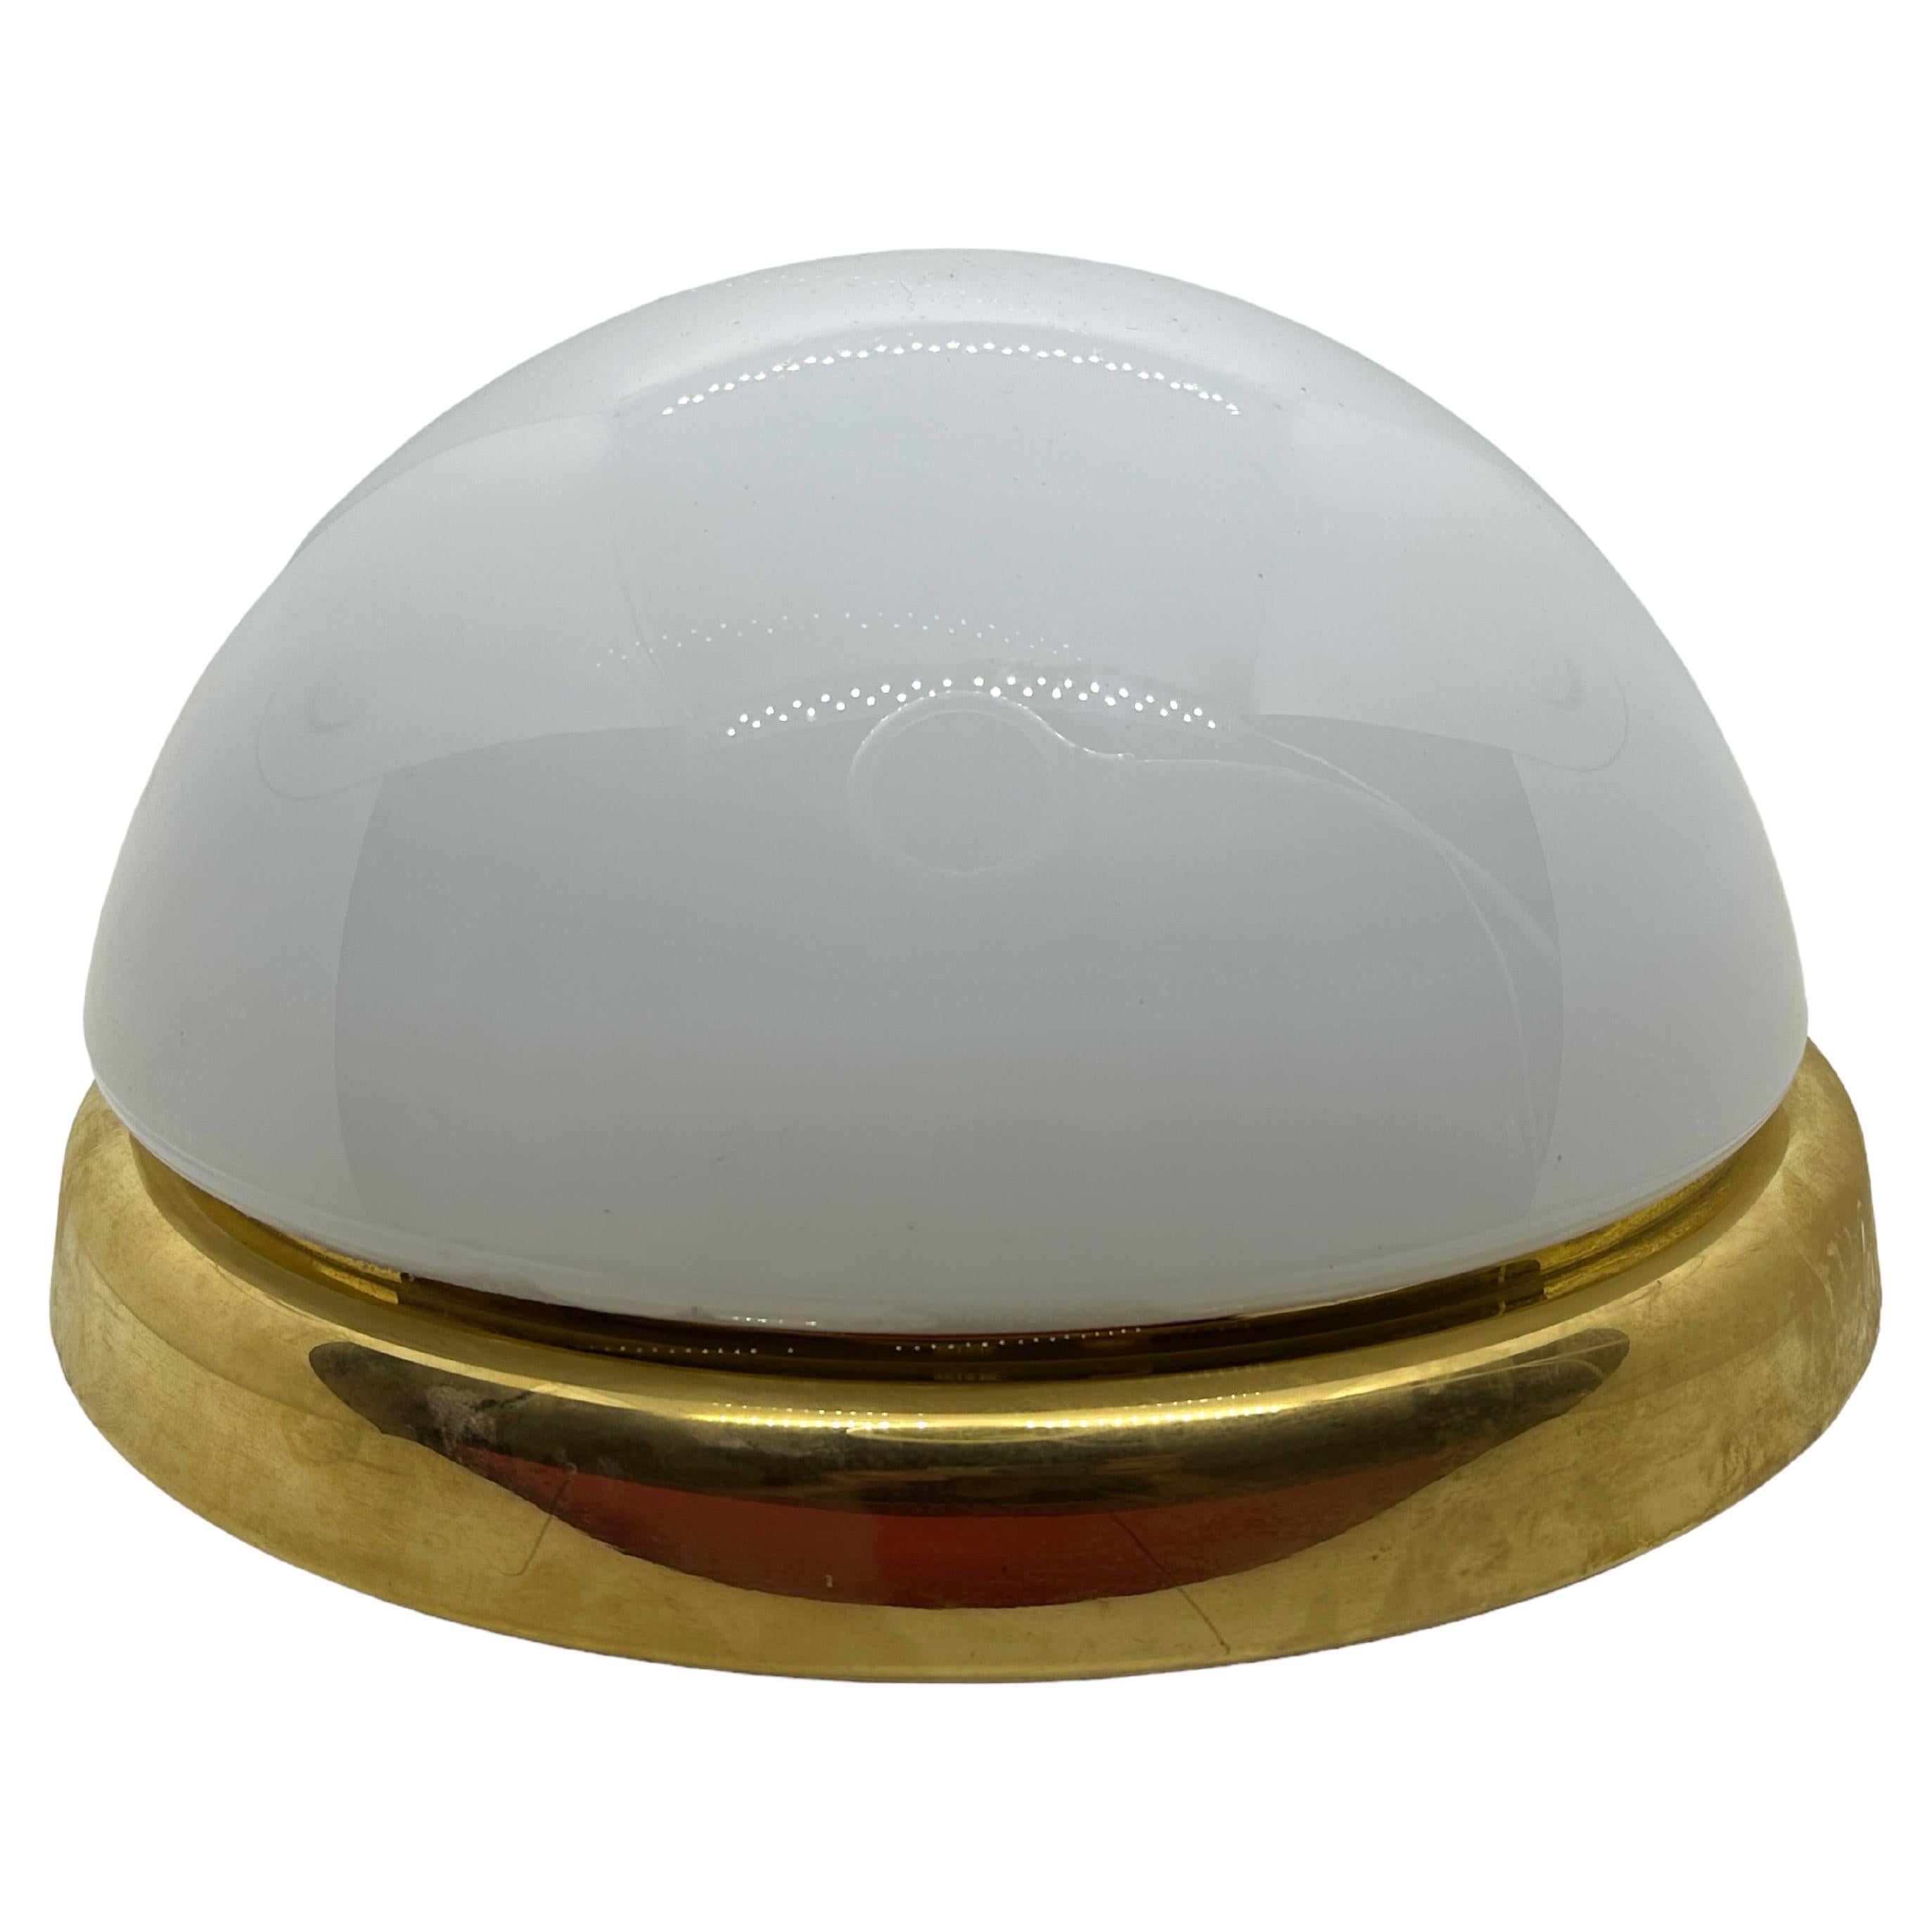 A beautiful flush mount by German manufacturer Glashuette Limburg. The largeglass element is supported by a polished brass plate with a two light source. Beautiful milk glass on a metal fixture. The Fixture requires two European E27 / 110 Volt